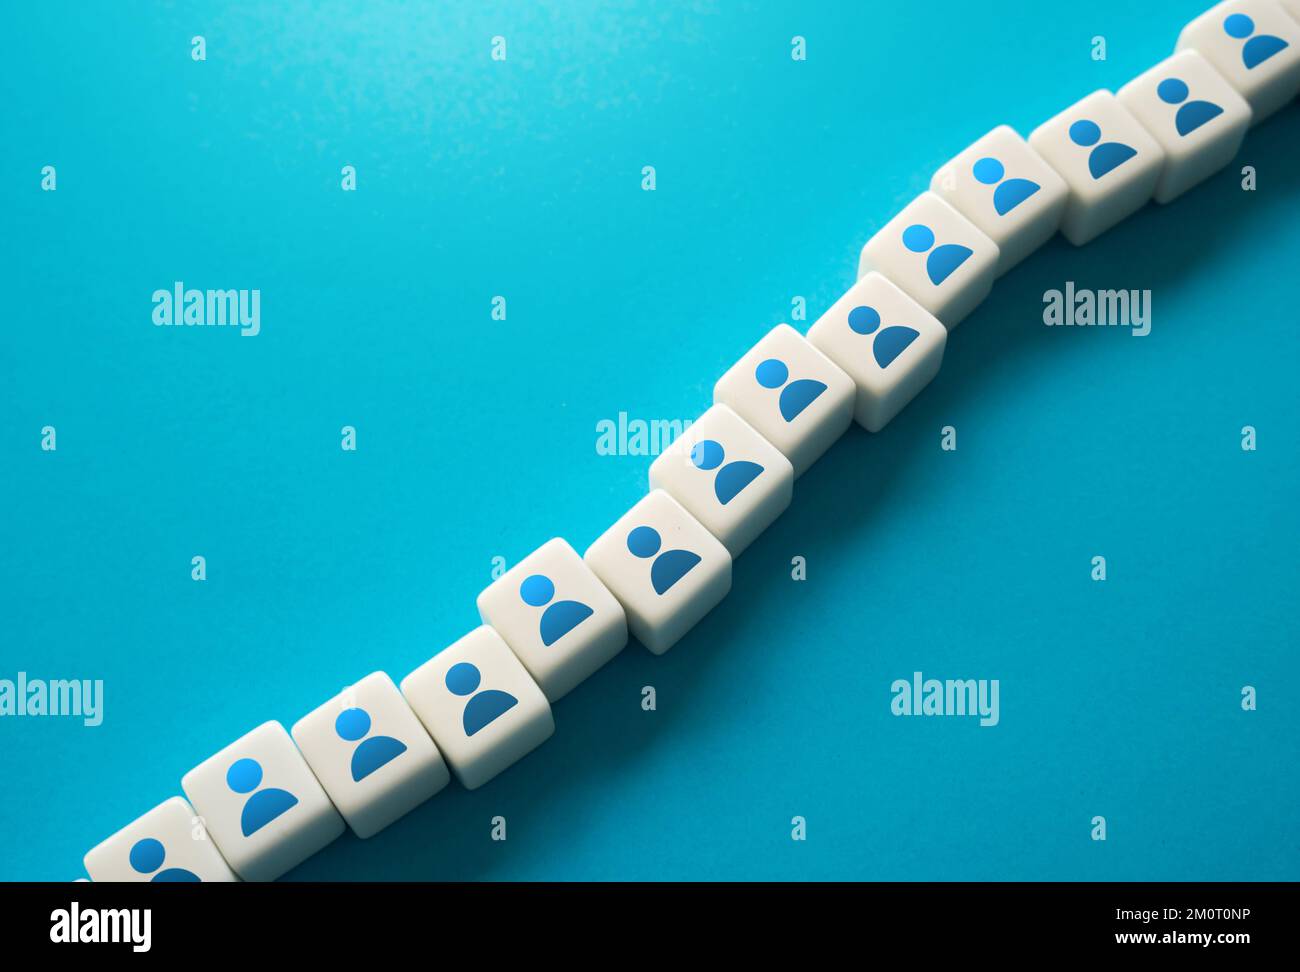 A chain of blocks with symbols of people. Human resources and work force. Staffing and recruiting candidates. Communication between employees. Buildin Stock Photo